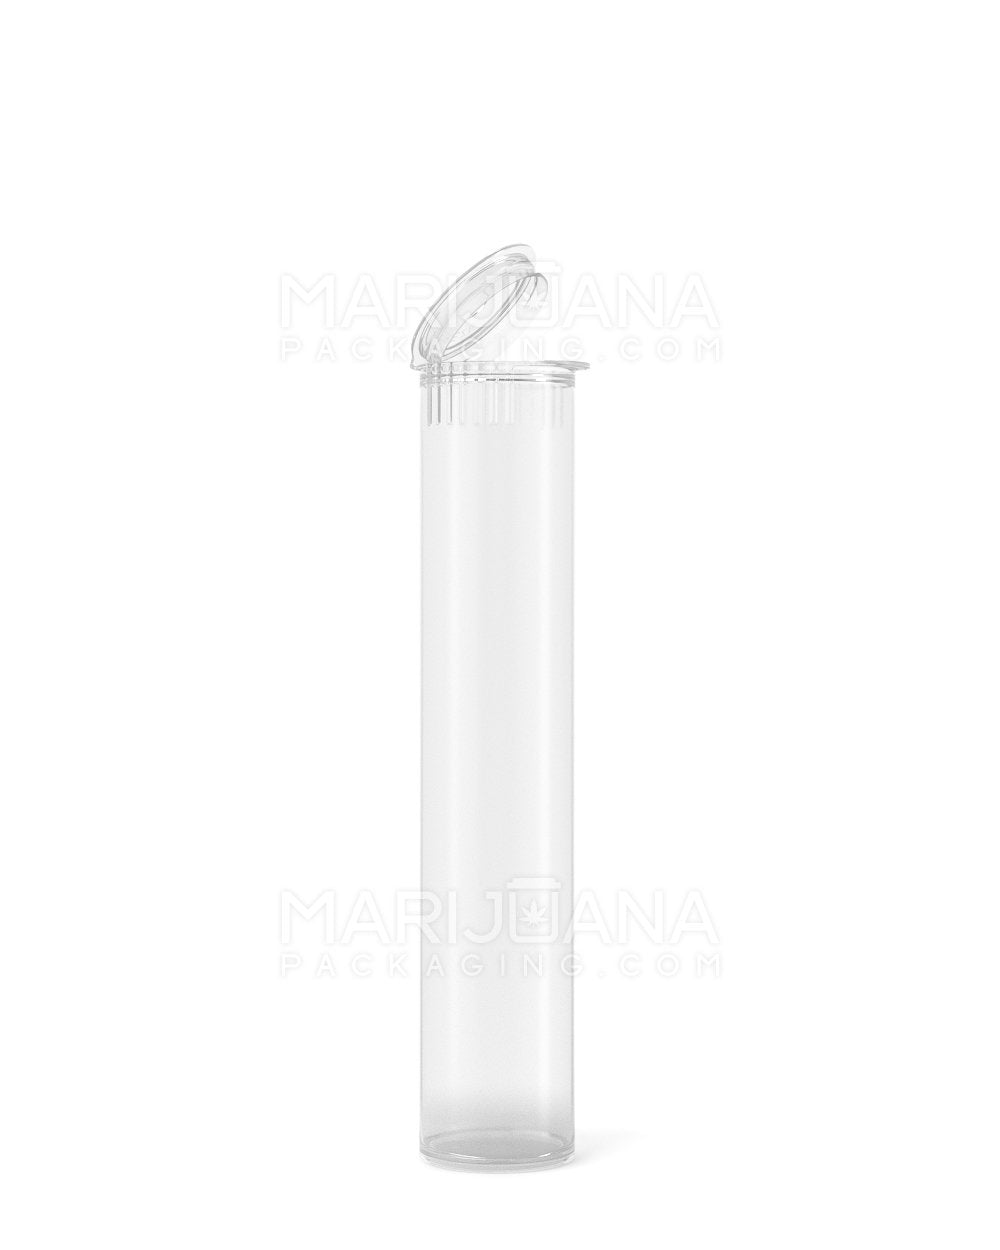 Child Resistant & Sustainable 100% Biodegradable Pop Top Plastic Pre-Roll Tubes | 95mm - Clear | Sample - 1